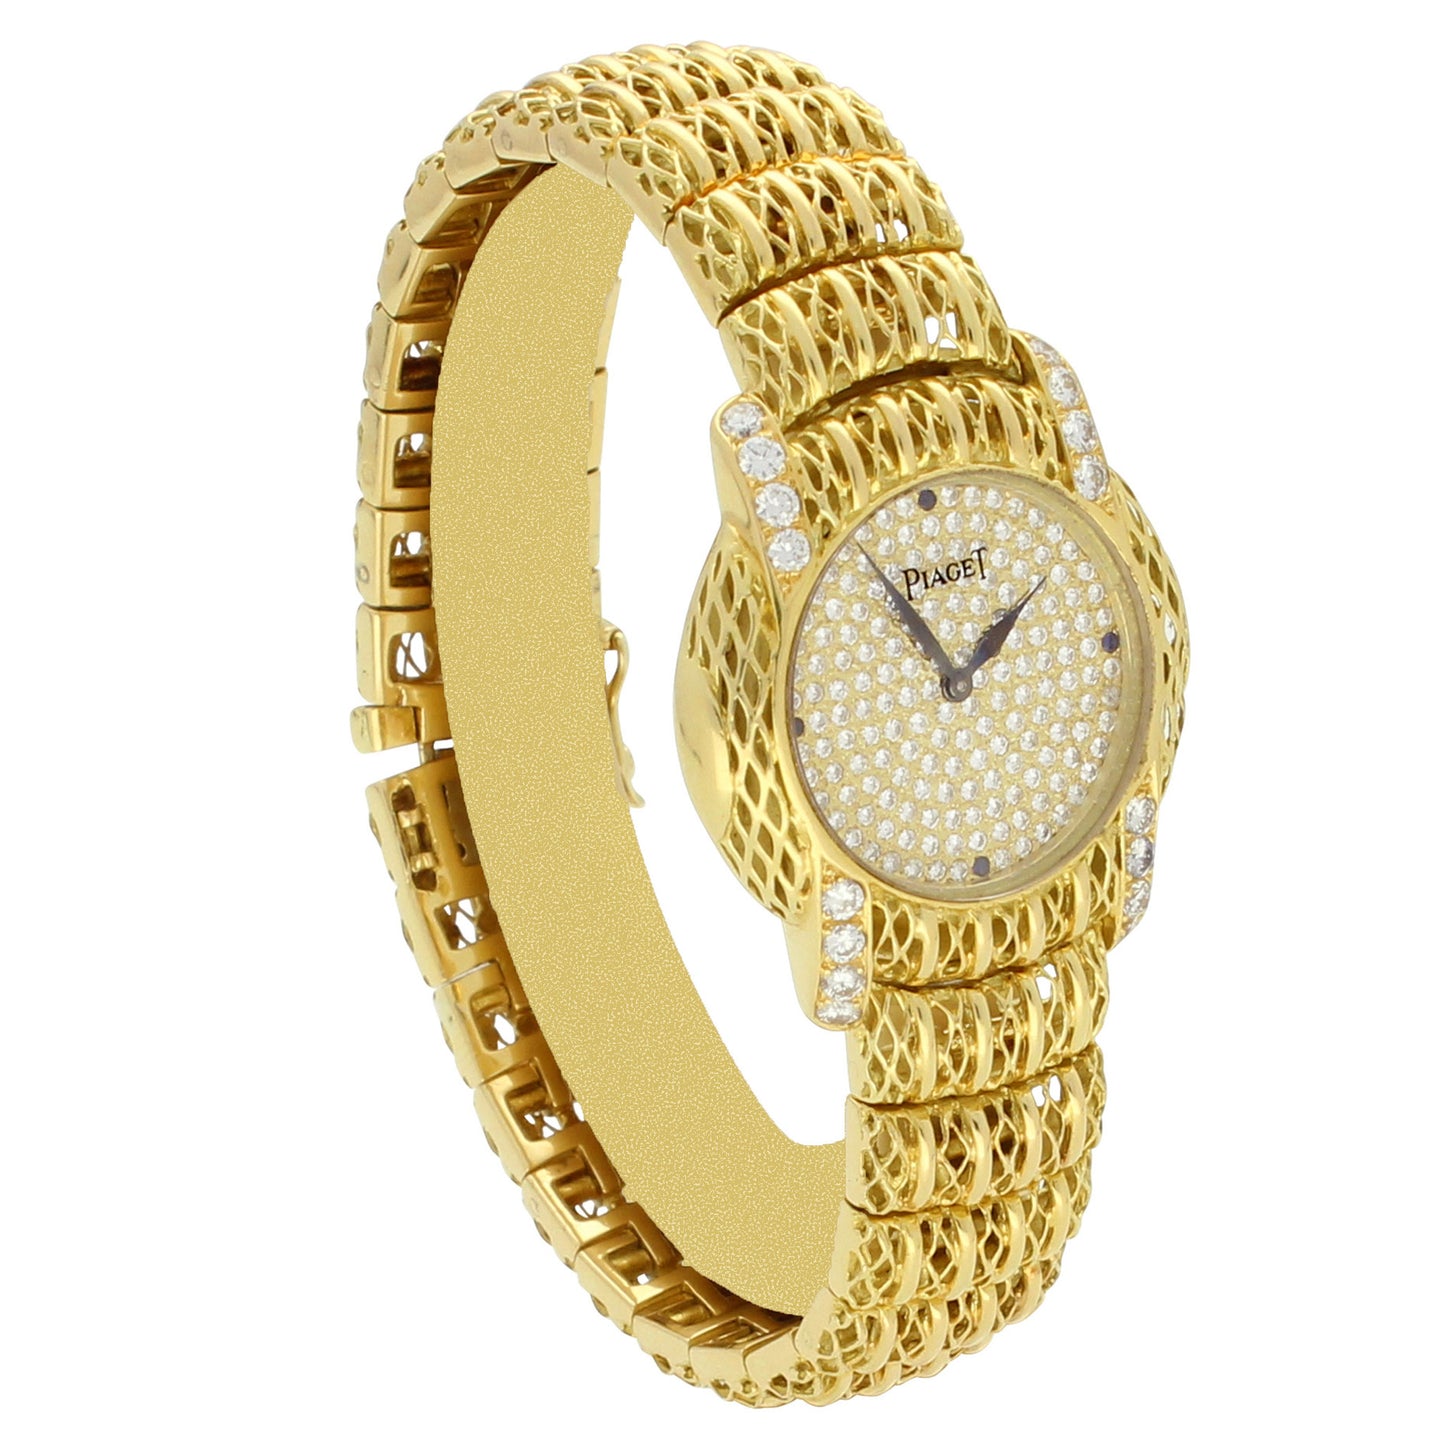 18ct yellow gold 'round cased' bracelet watch with diamond set dial and diamond set lugs. Made 1980s